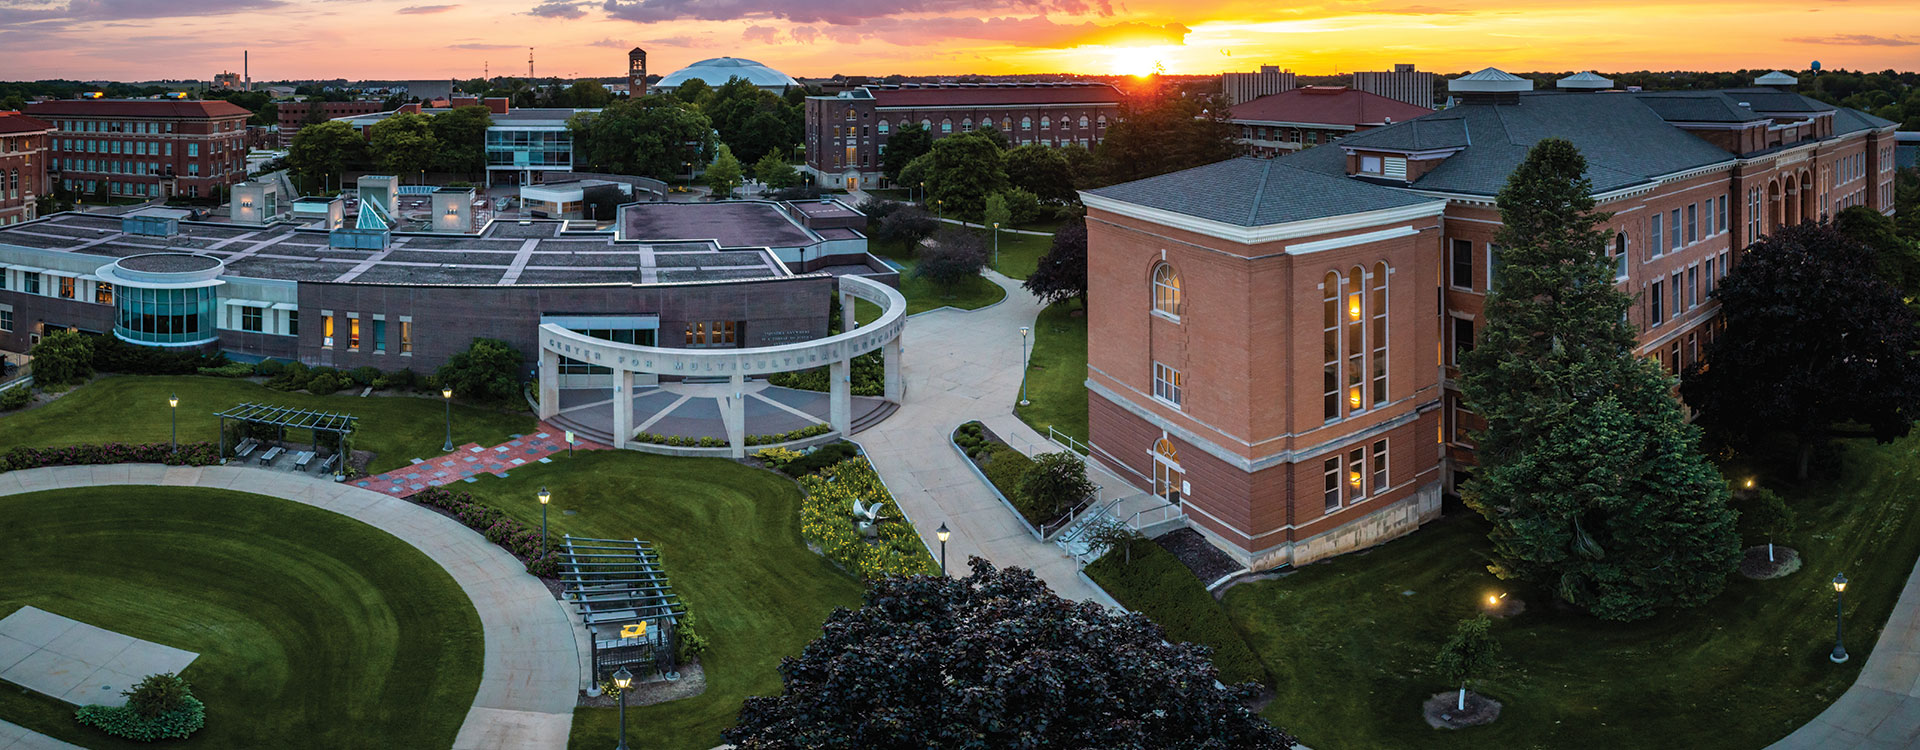 The University of Northern Iowa campus at sunset